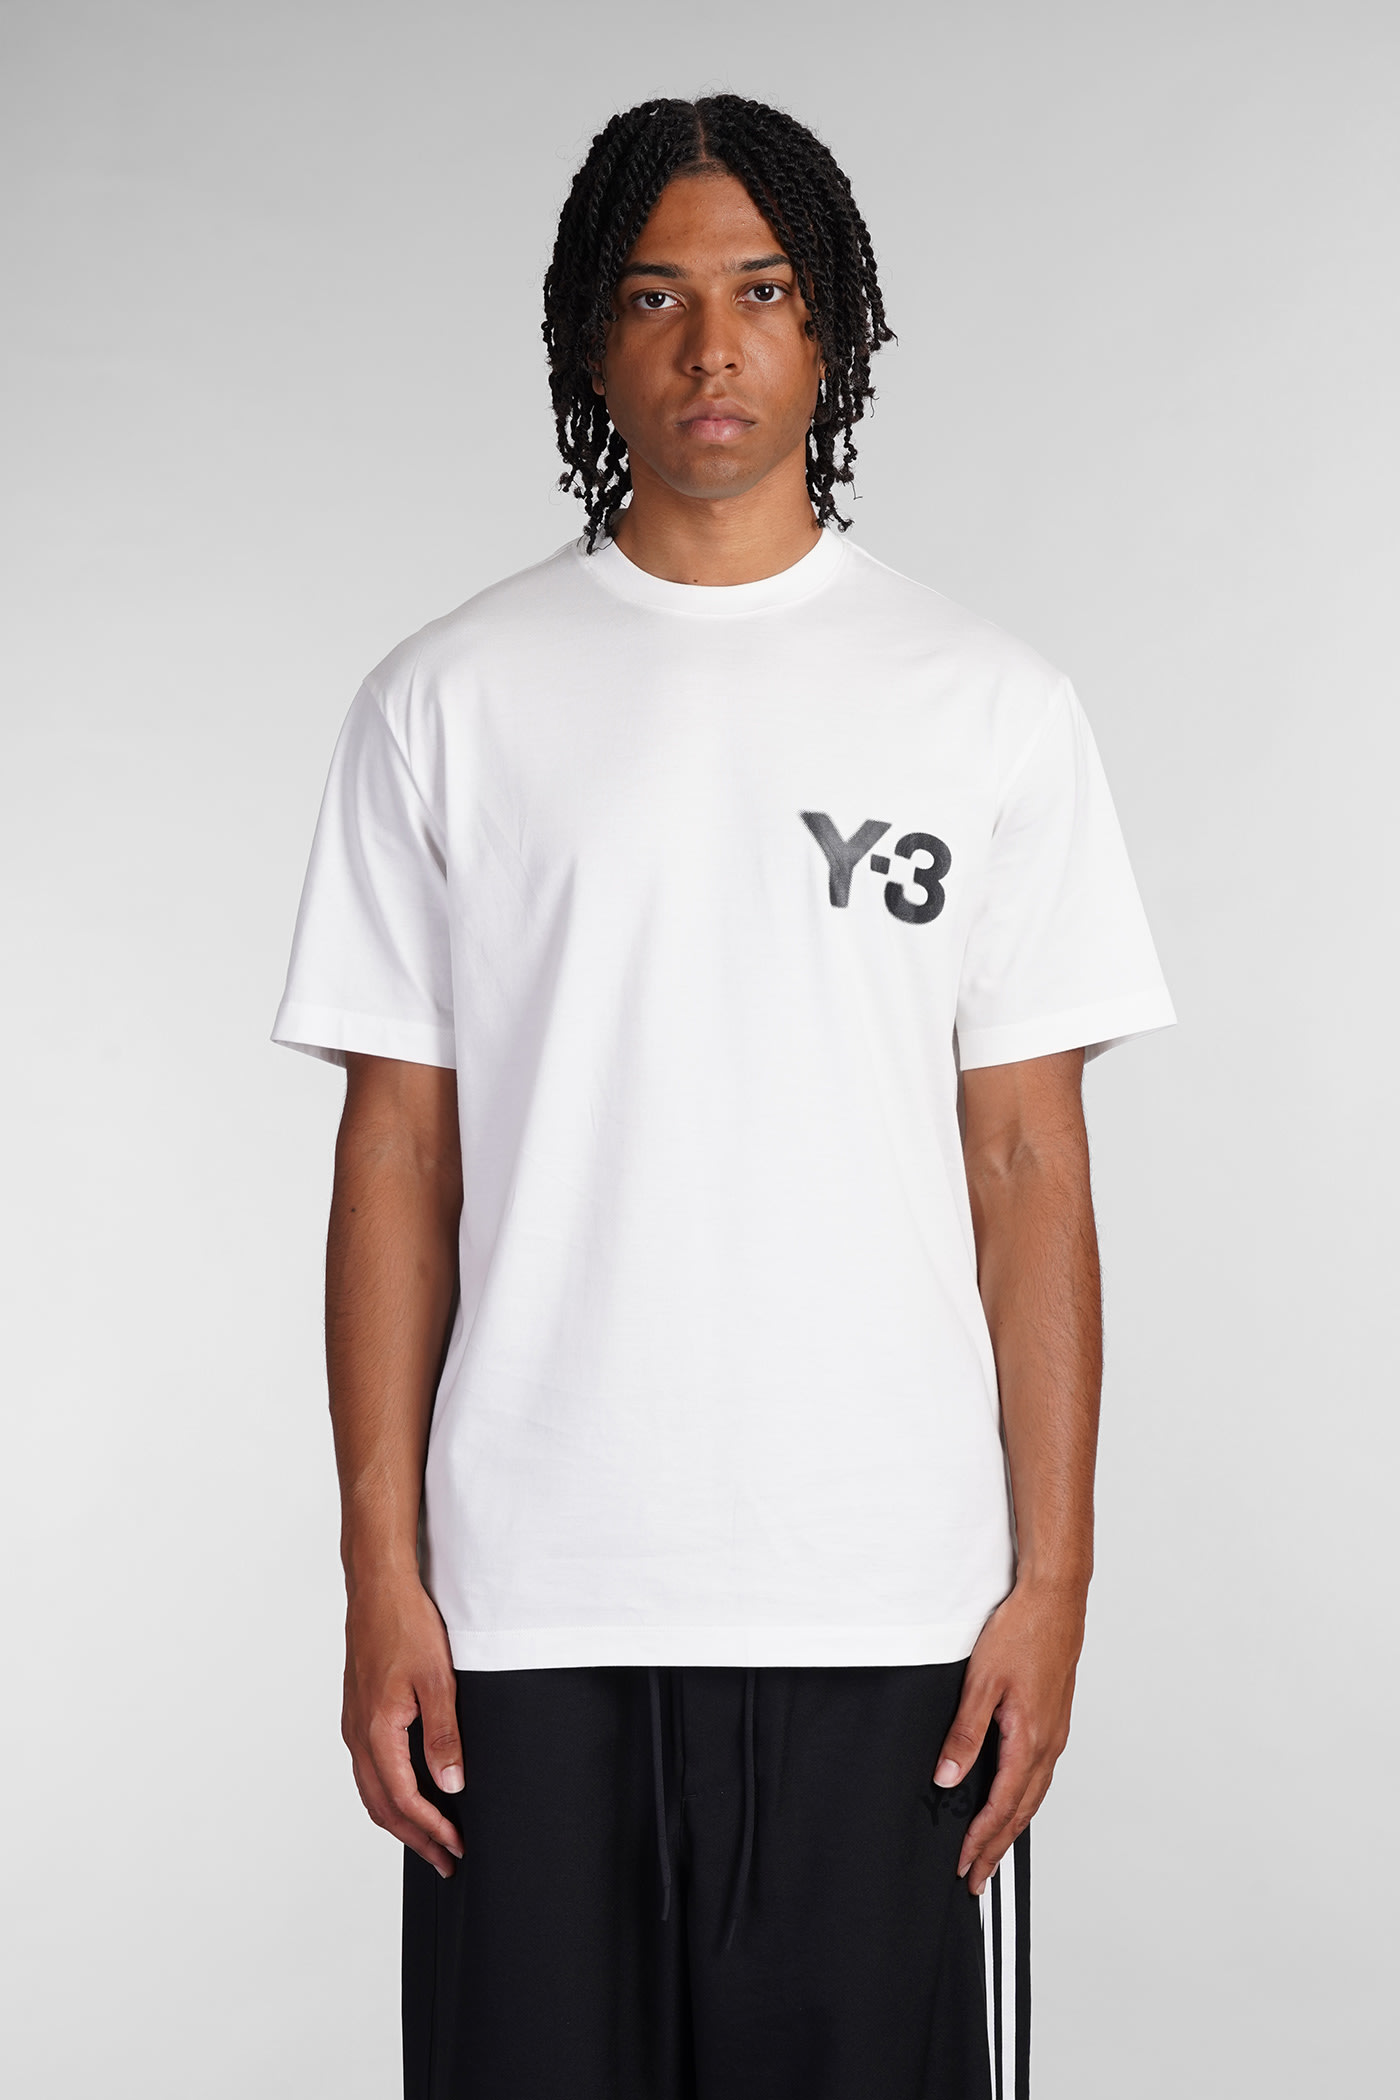 T-shirt In White Cotton